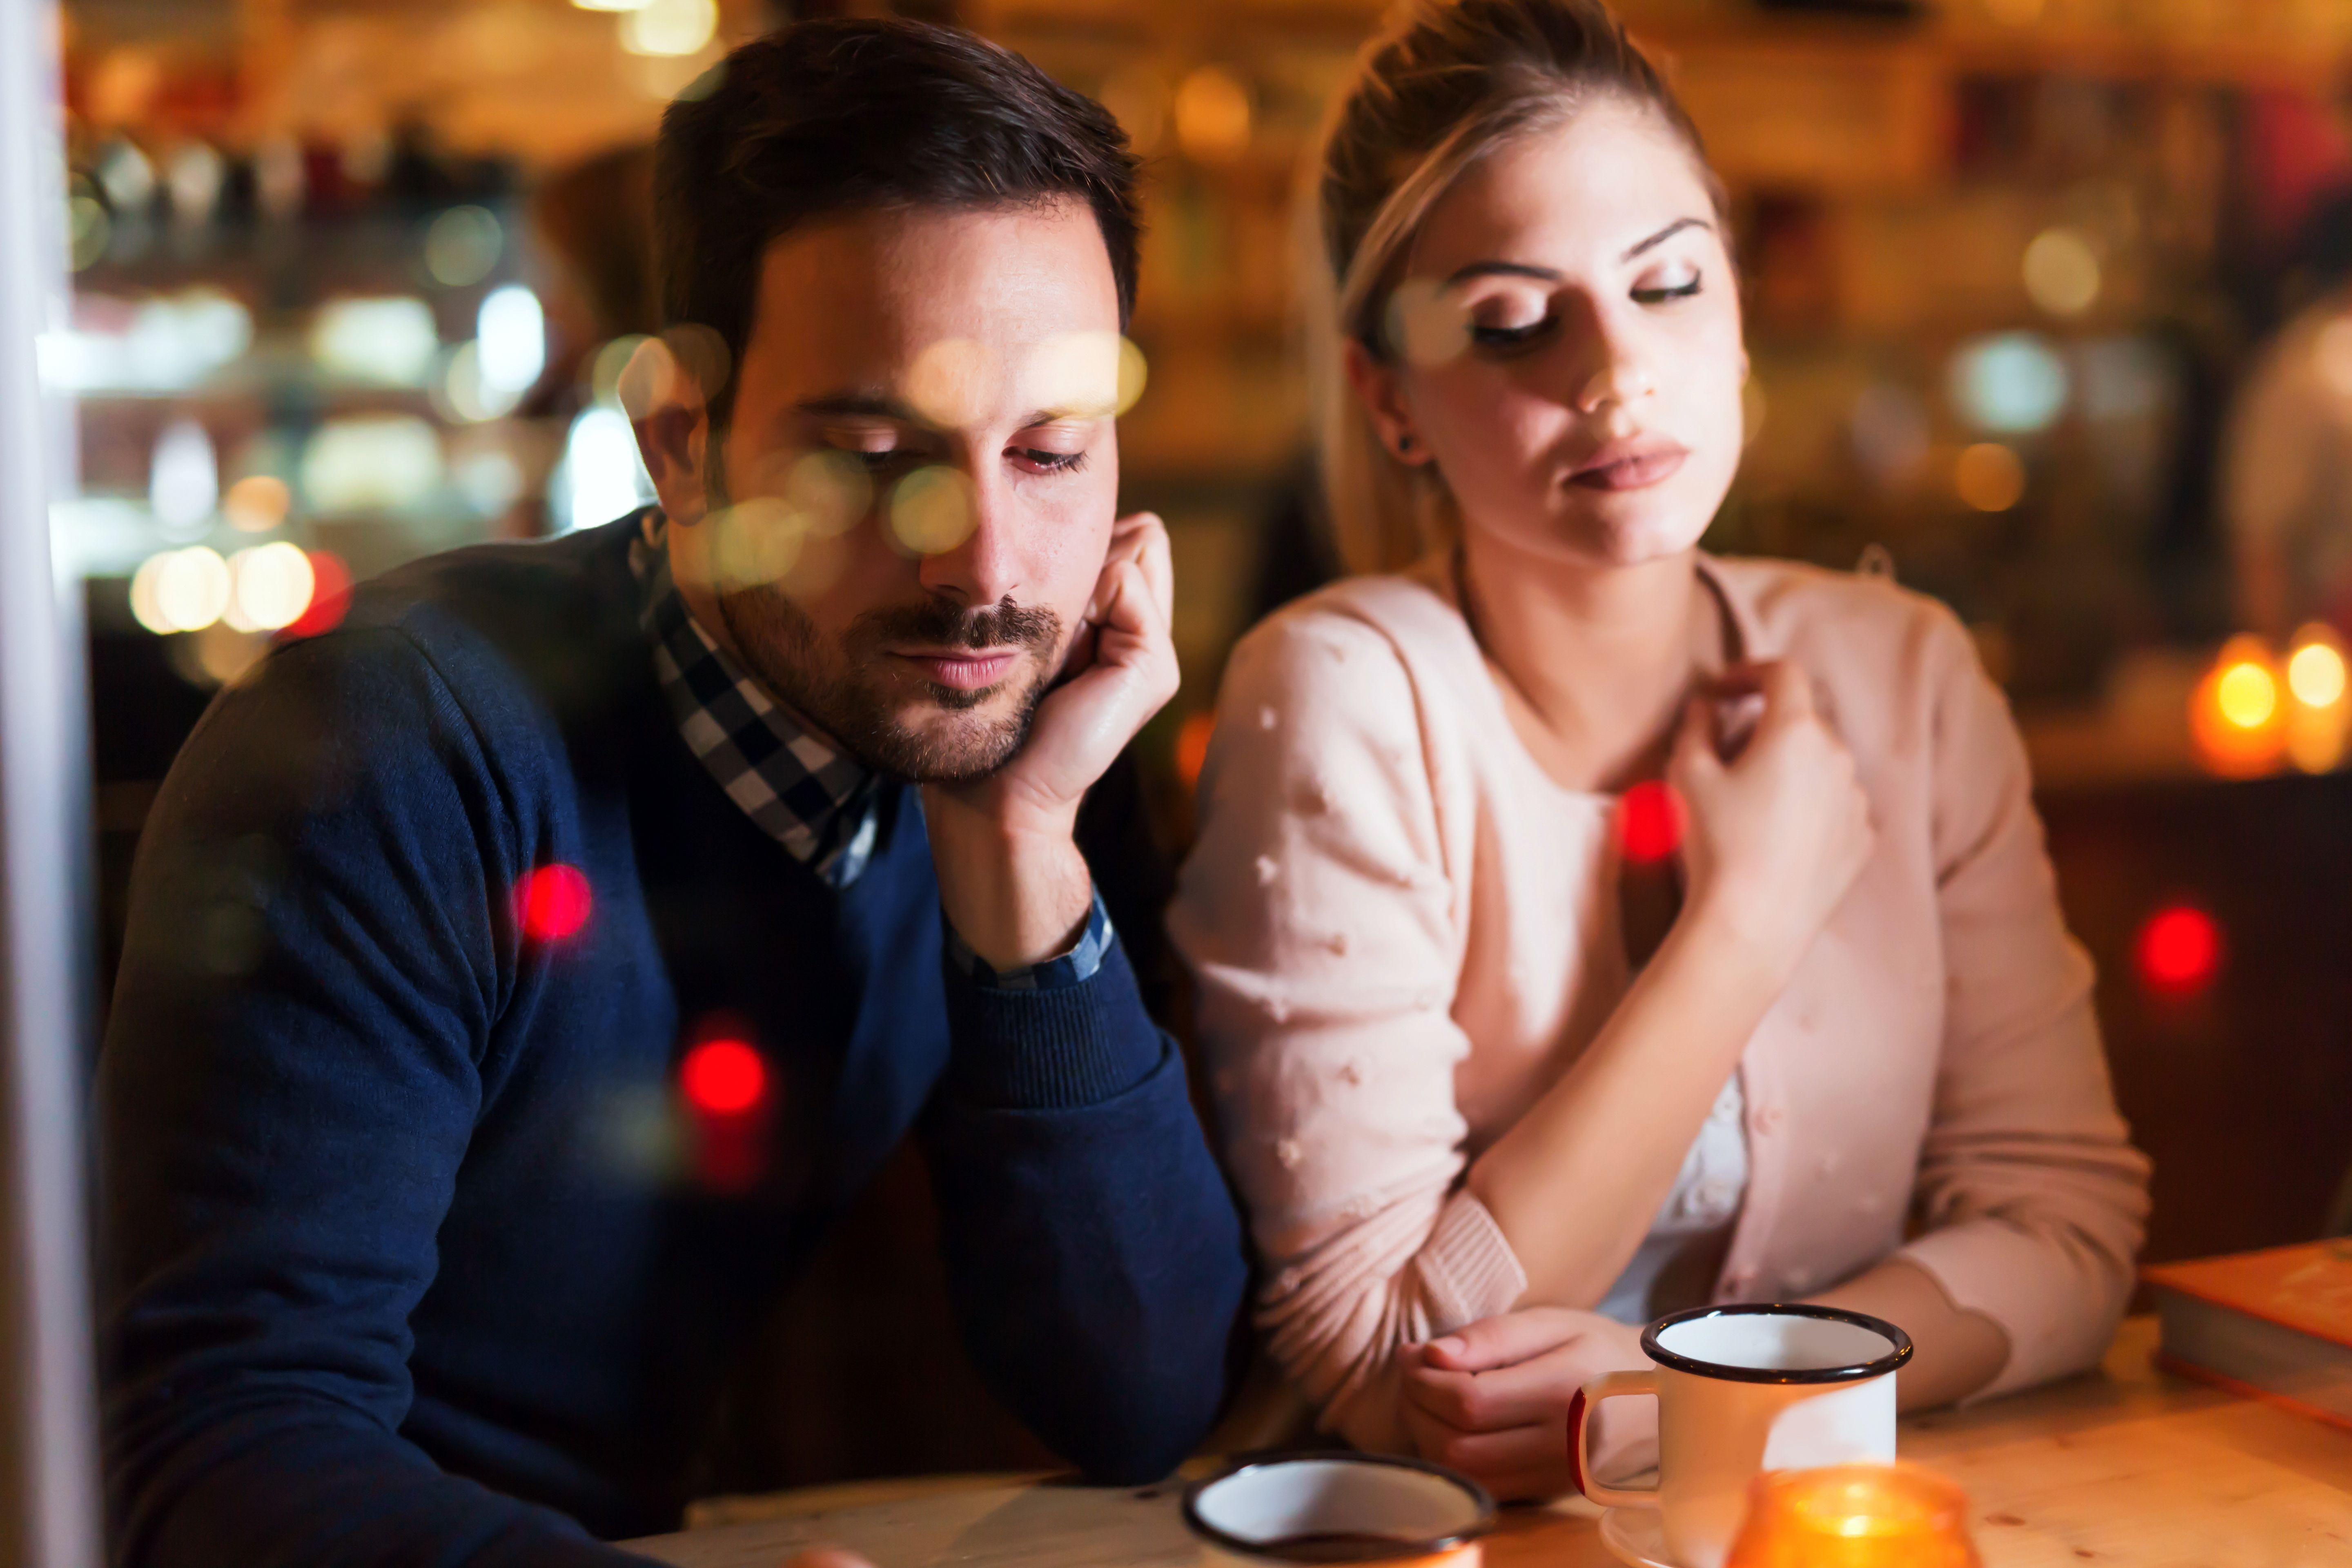 A bored couple in a cafe, showing signs of jealousy. | Source: Shutterstock